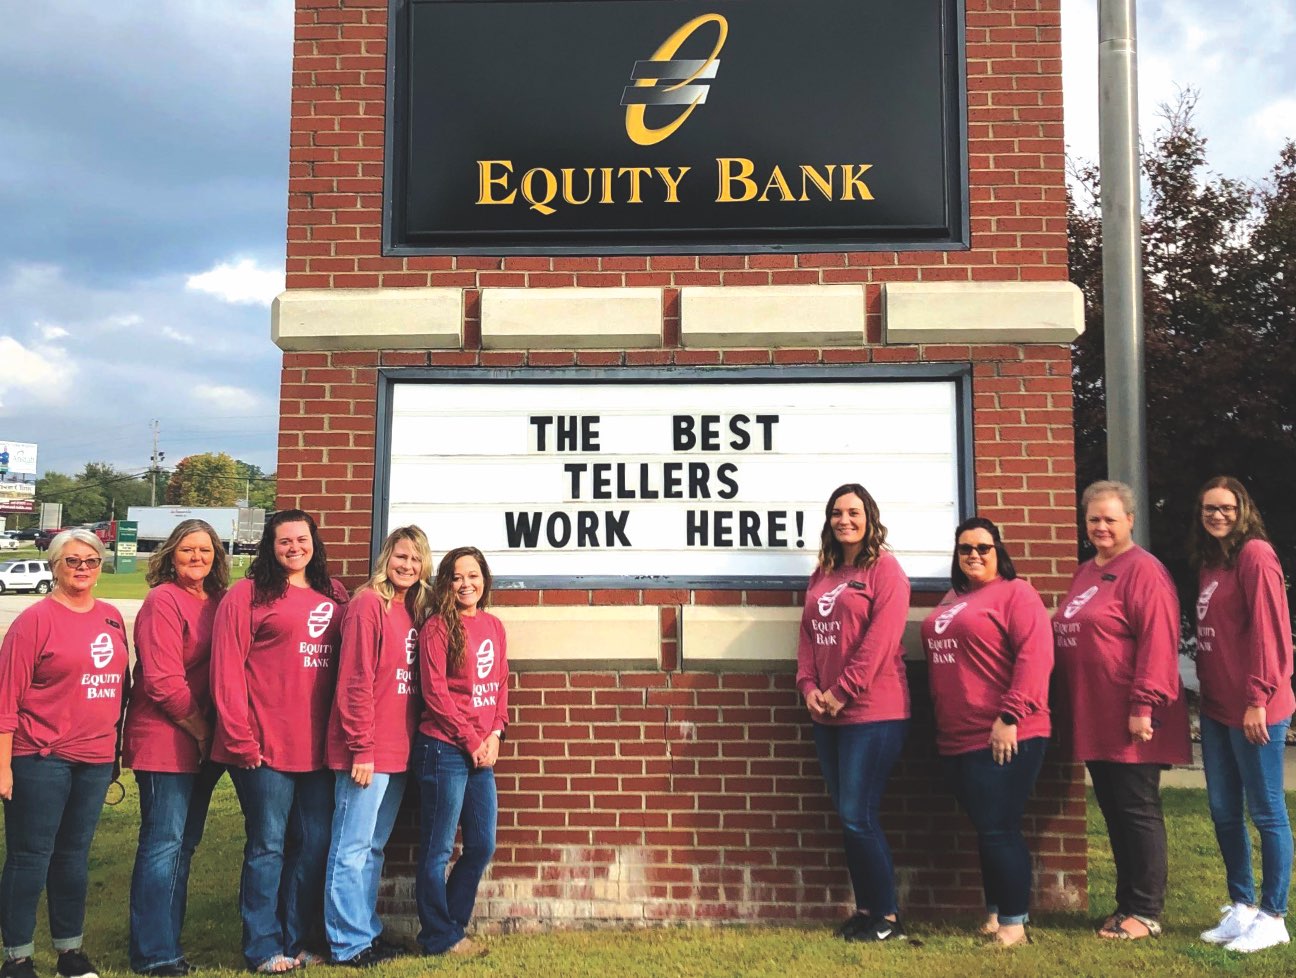 A group of Equity Bank employees flanking an exterior bank sign.